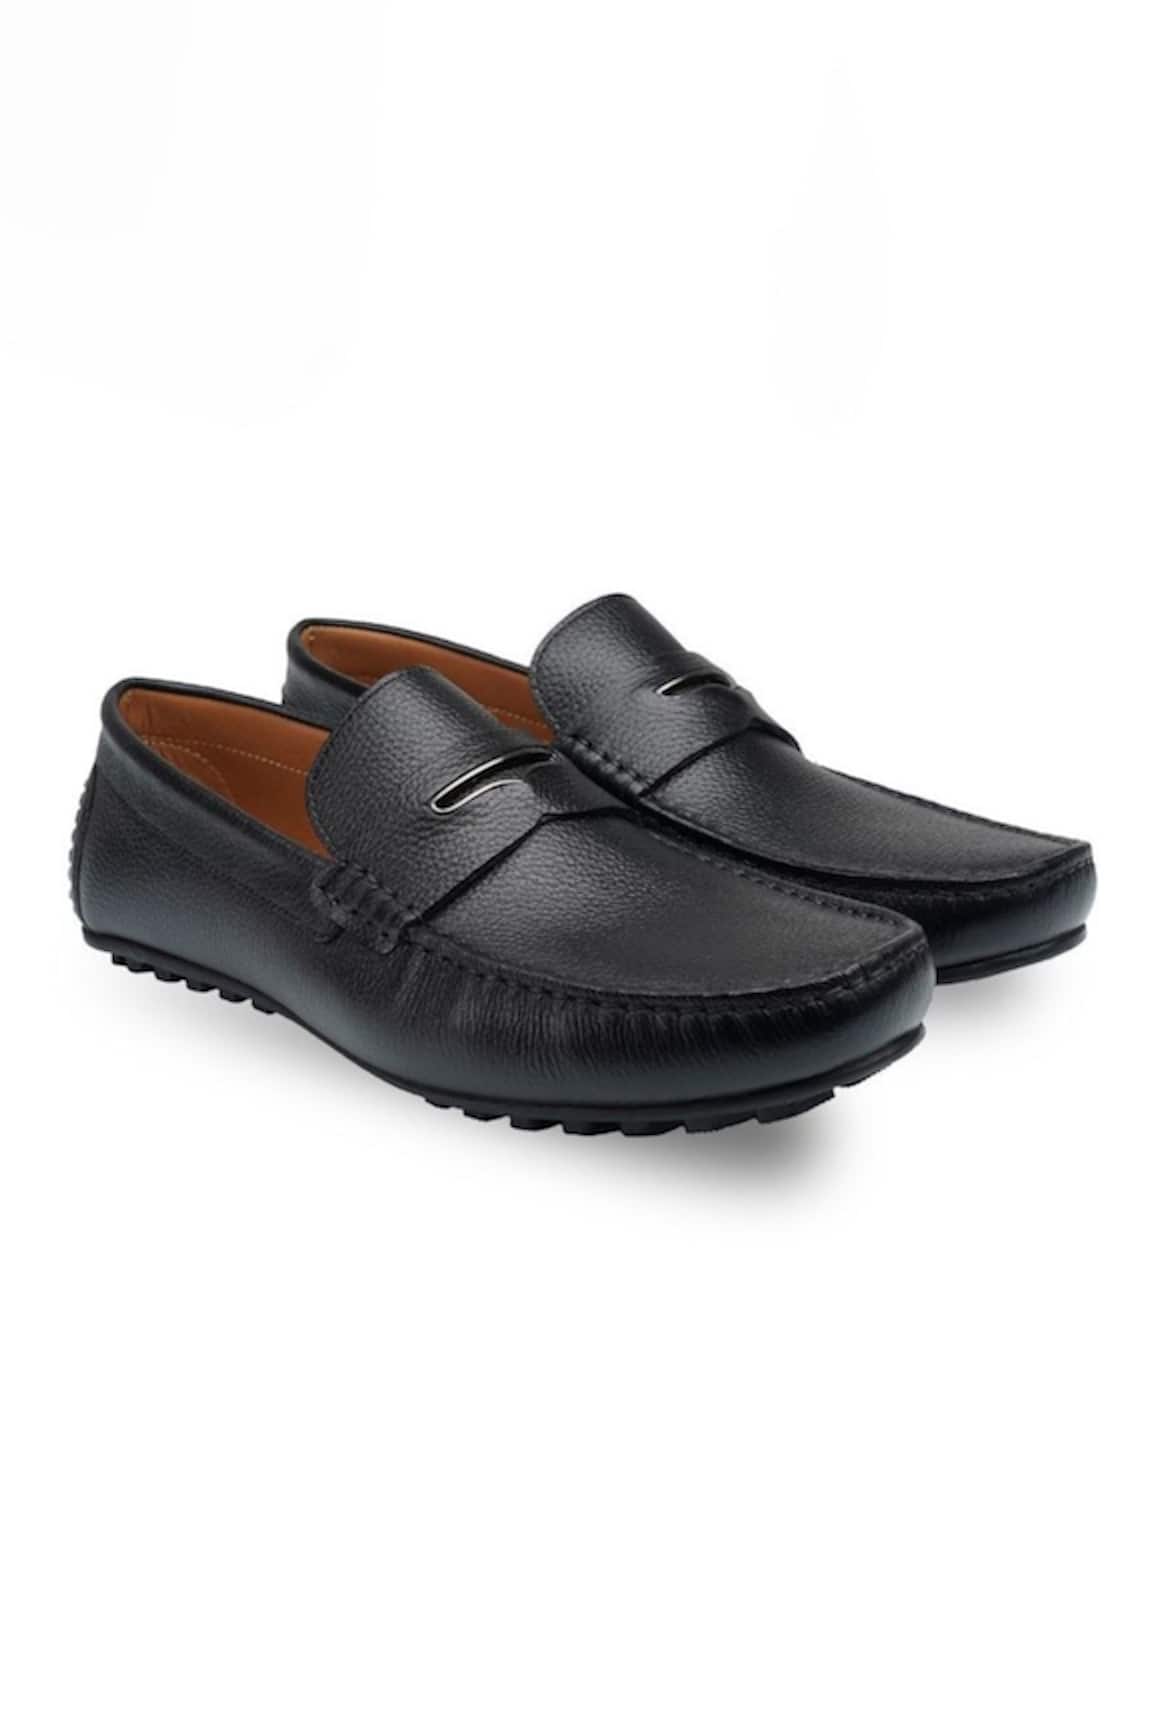 Rapawalk Handcrafted Penny Moccasins Loafers